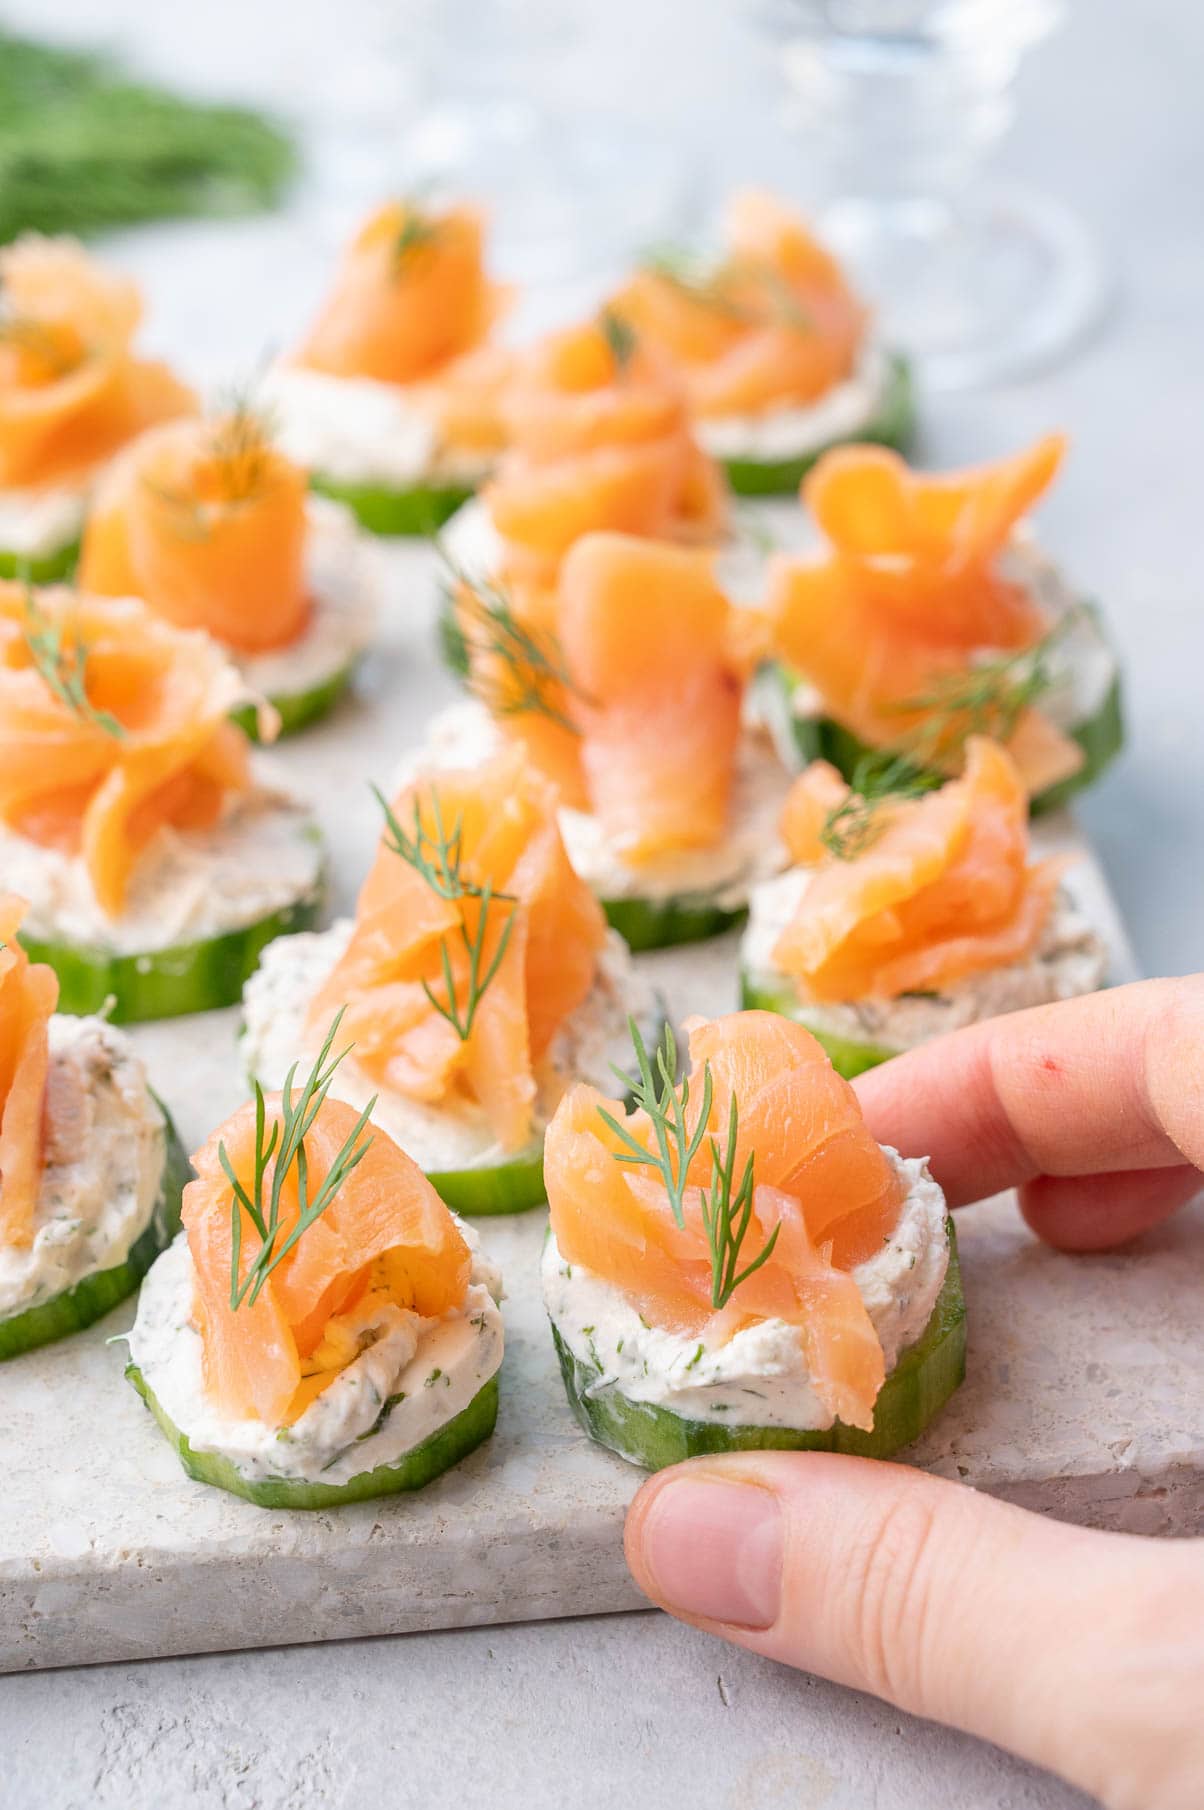 Smoked salmon appetizers held in a hand and on a white stone board.